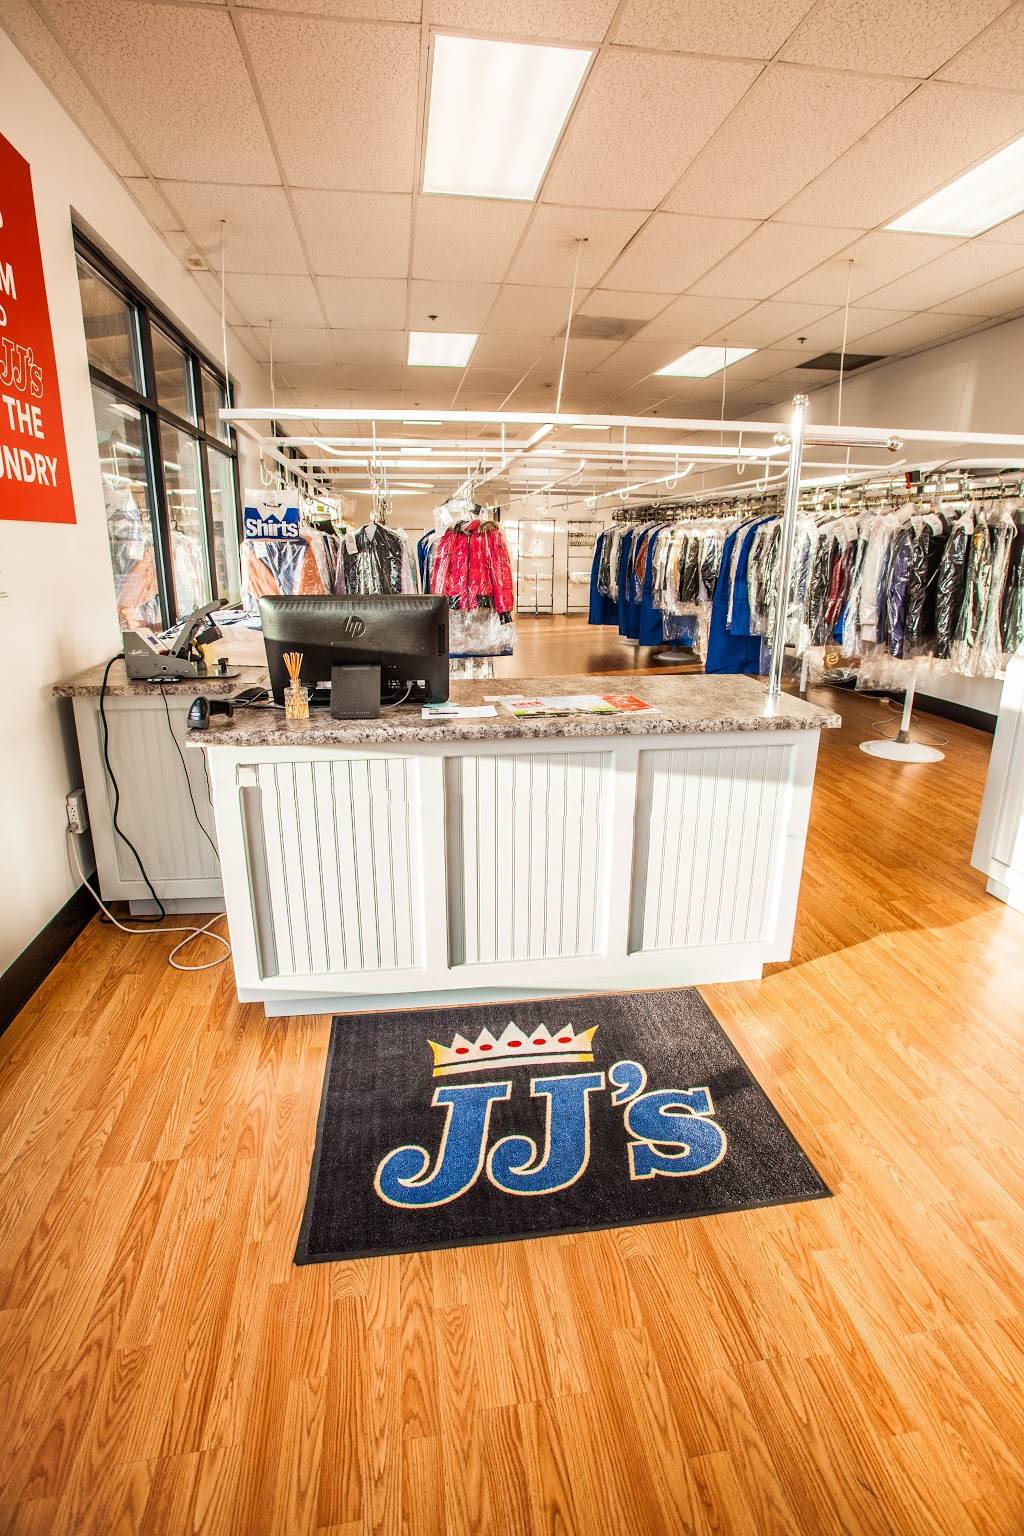 JJs Cleaners | 2399 Wingfield Hills Rd #120, Sparks, NV 89436, USA | Phone: (775) 624-1724